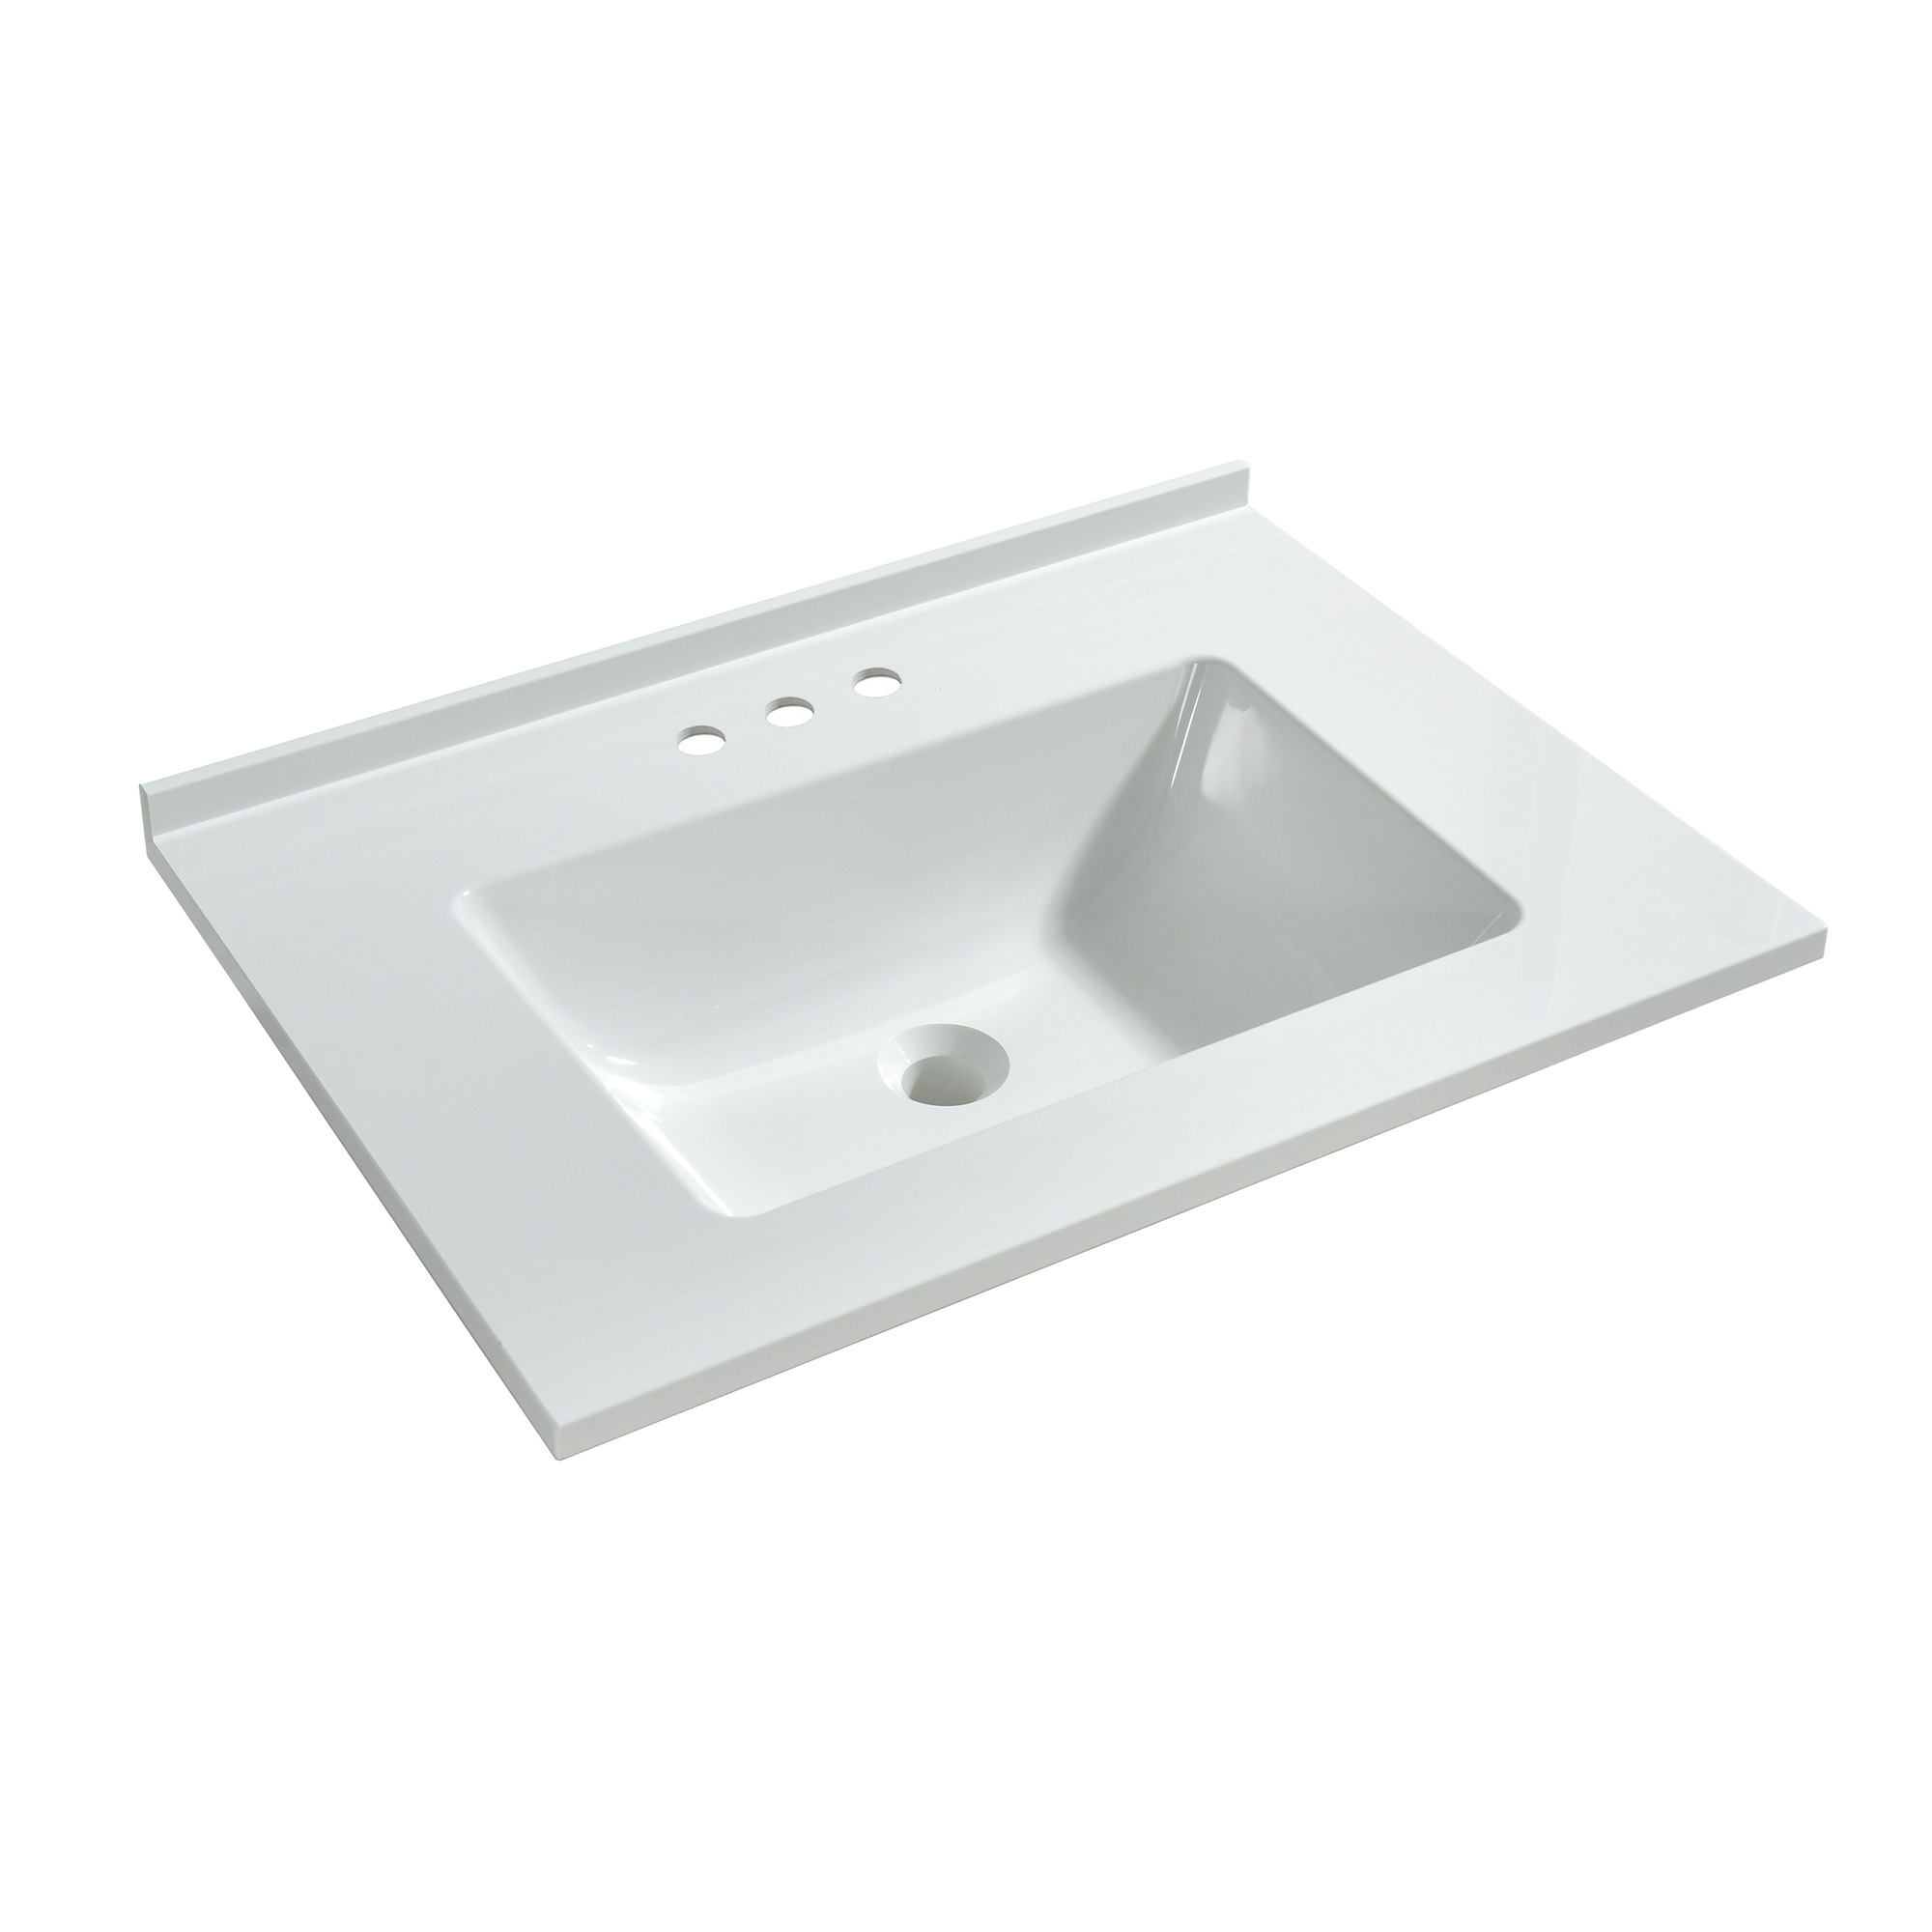 WOODBRIDGE VT3122-1008 Solid Surface Vanity Top with with Intergrated Sink and 3 Faucet Holes for 8-Inch Widespread Faucet, 31